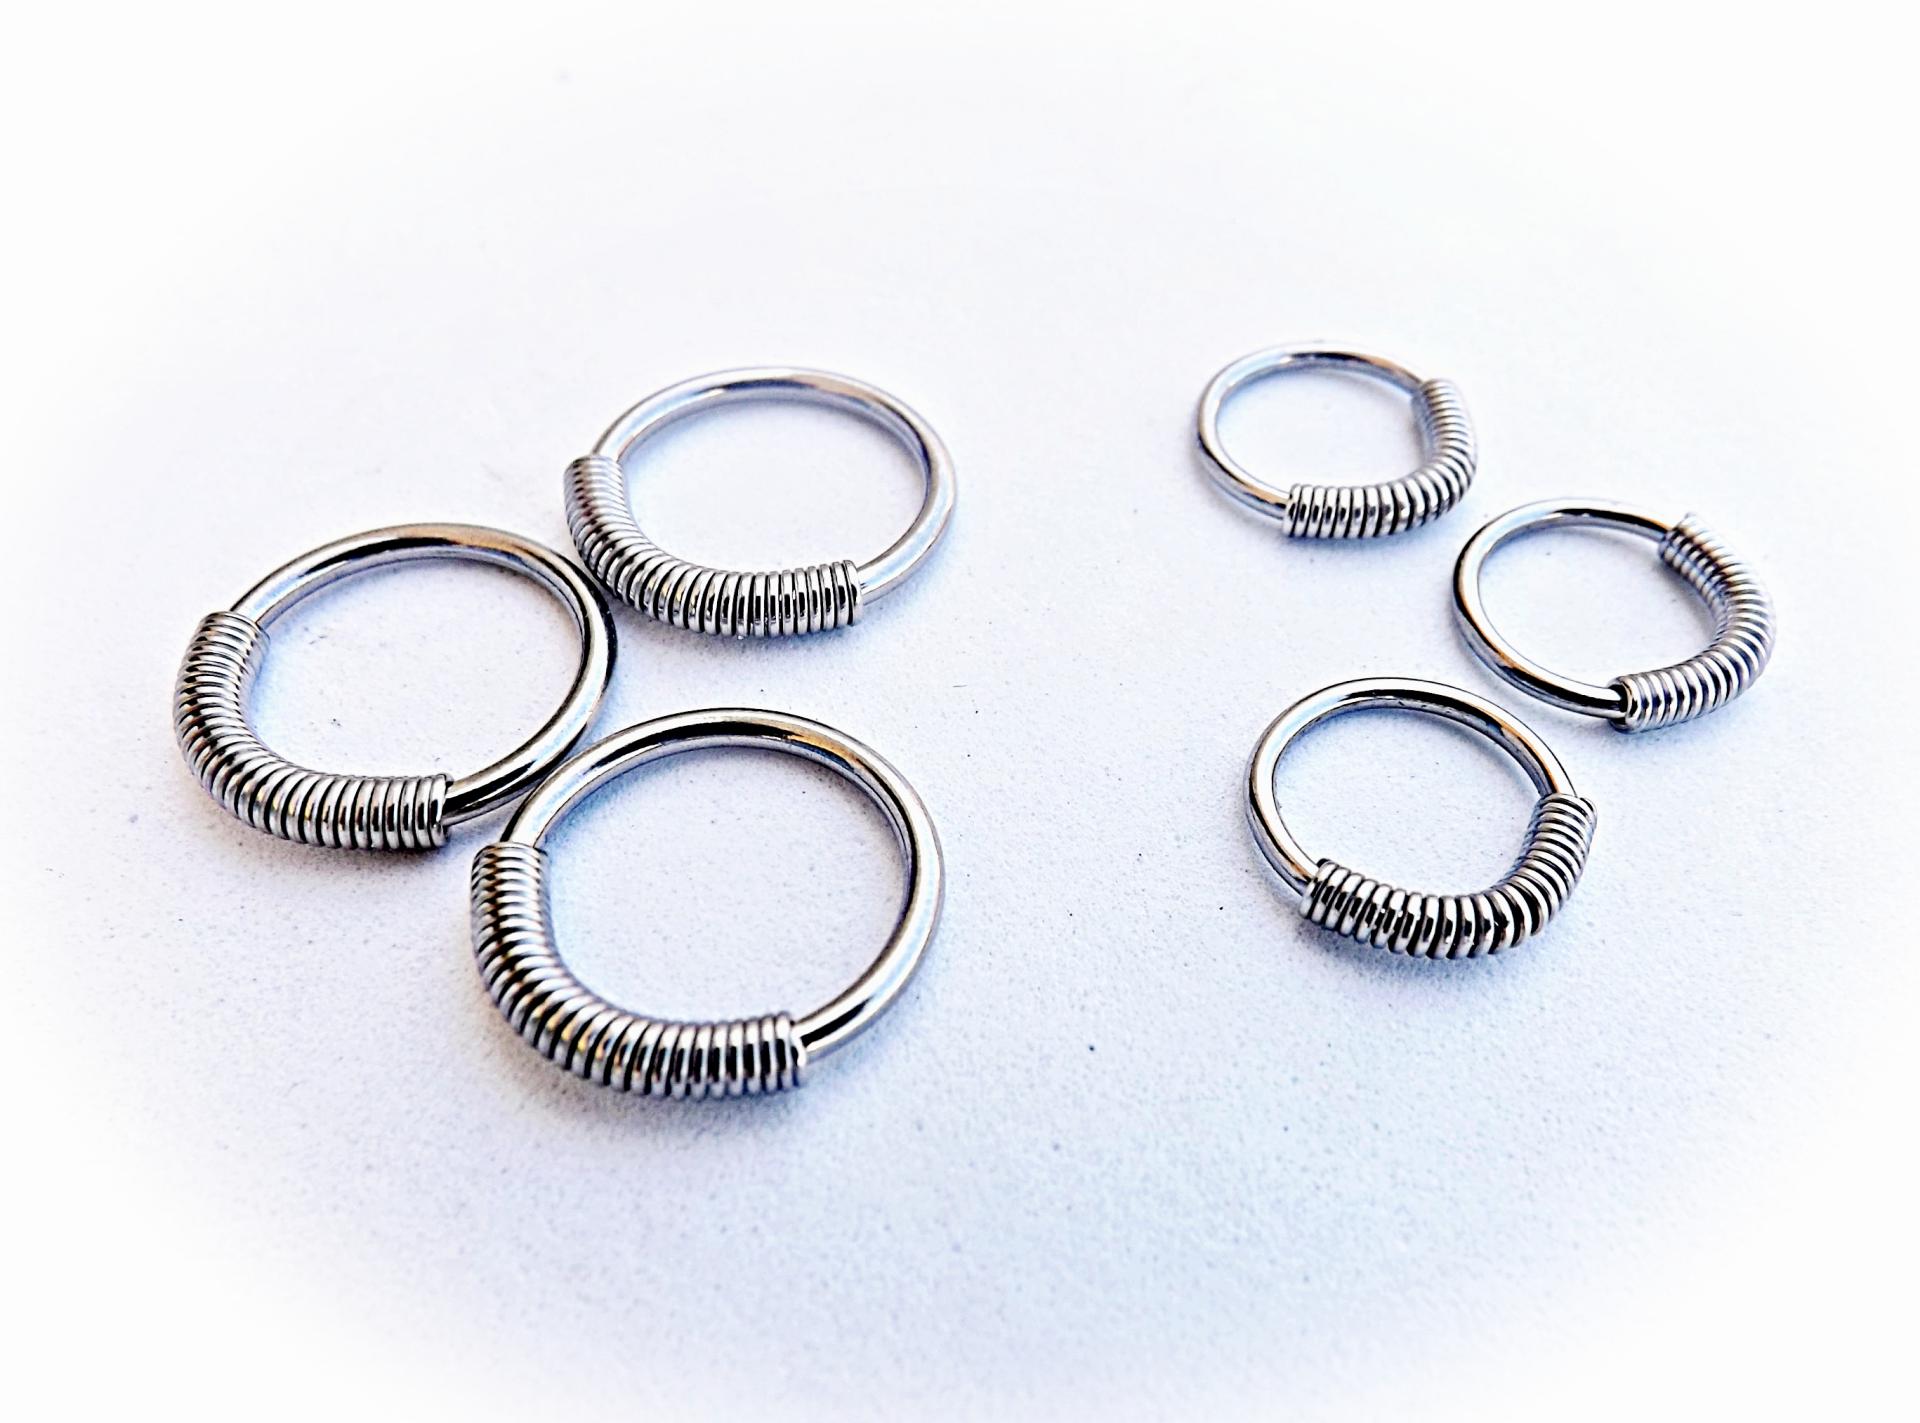 Steel Spring Wire Captive Ring BCR Body Piercing Jewellery